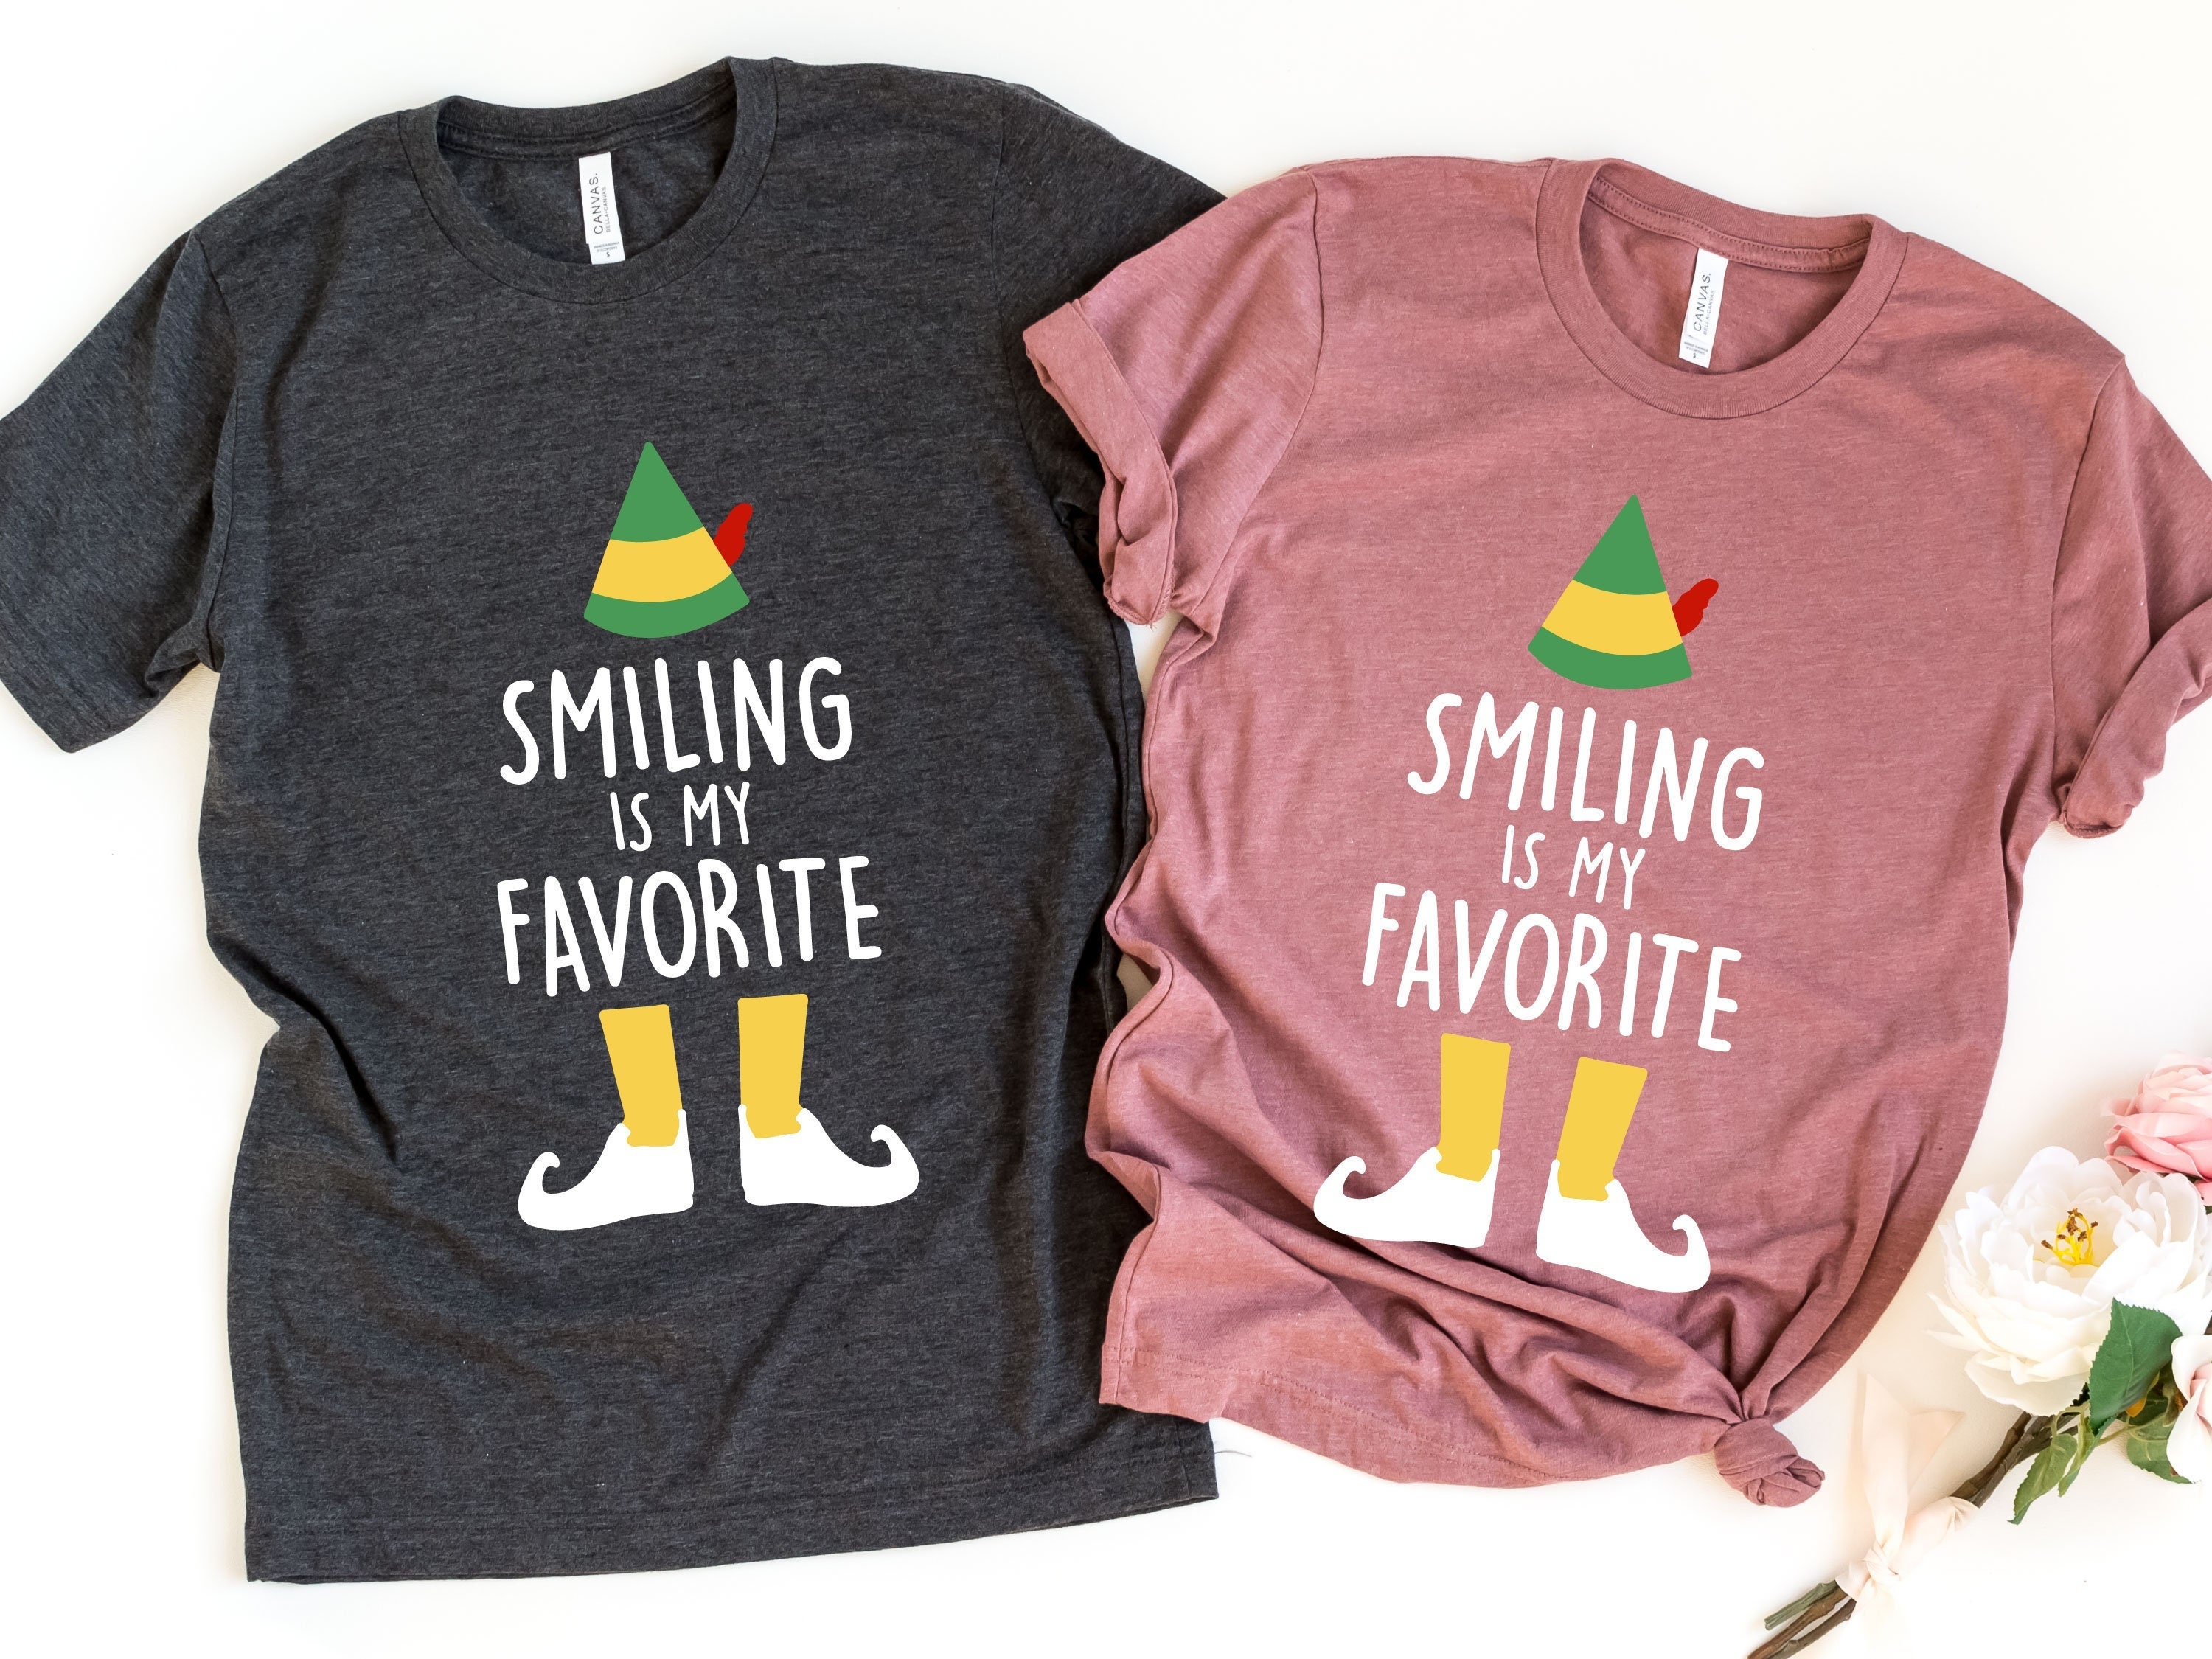 Discover Smiling Is My Favorite Shirt, Holiday Shirt, Elf Shirt